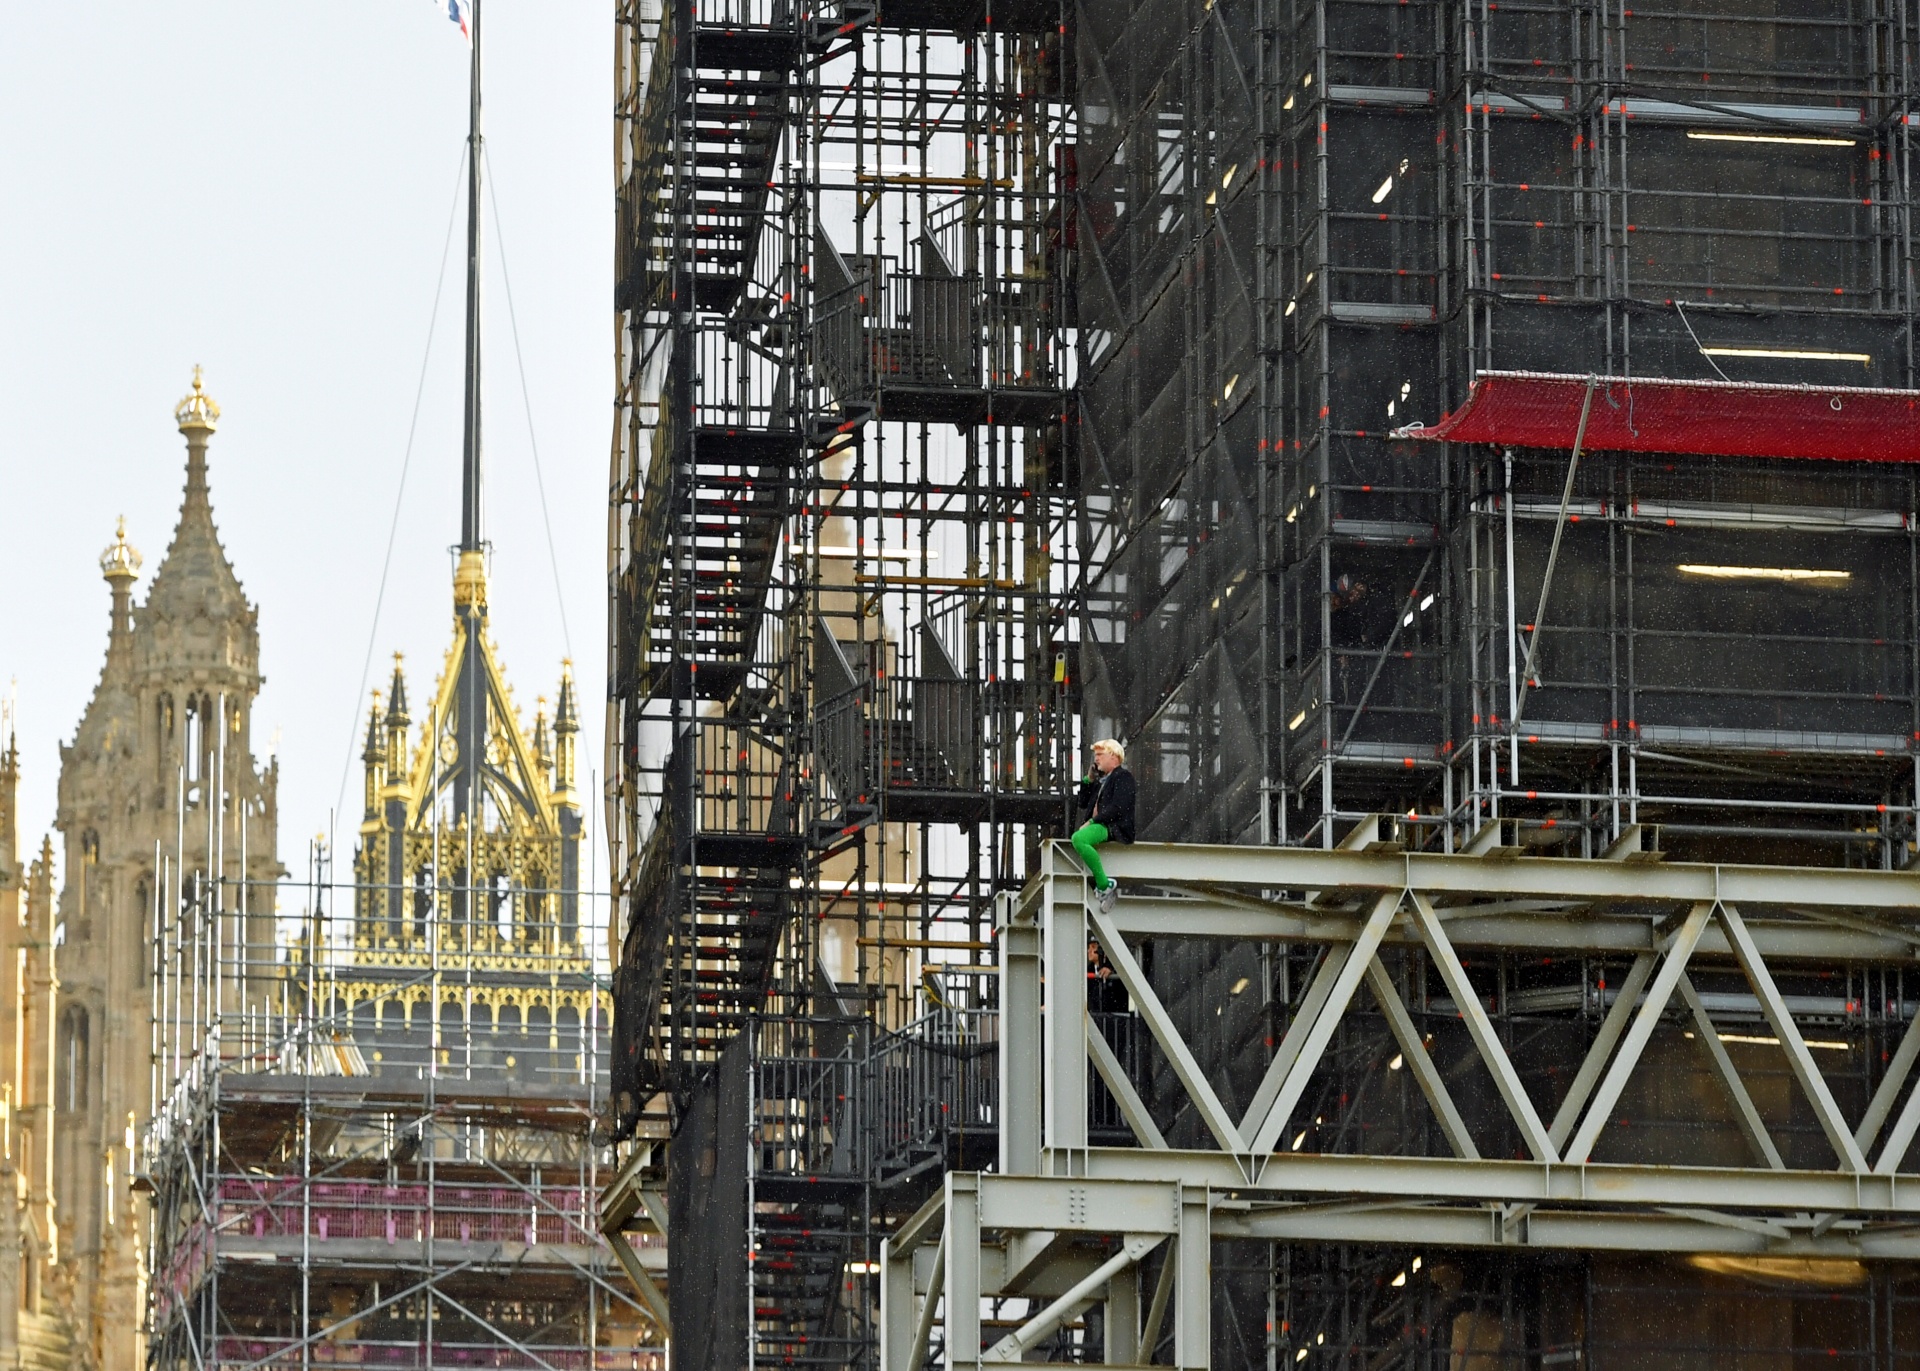 An Extinction Rebellion protester who has scaled the scaffolding surrounding Big Ben is seen without being attached to any ropes at the Houses of Parliament